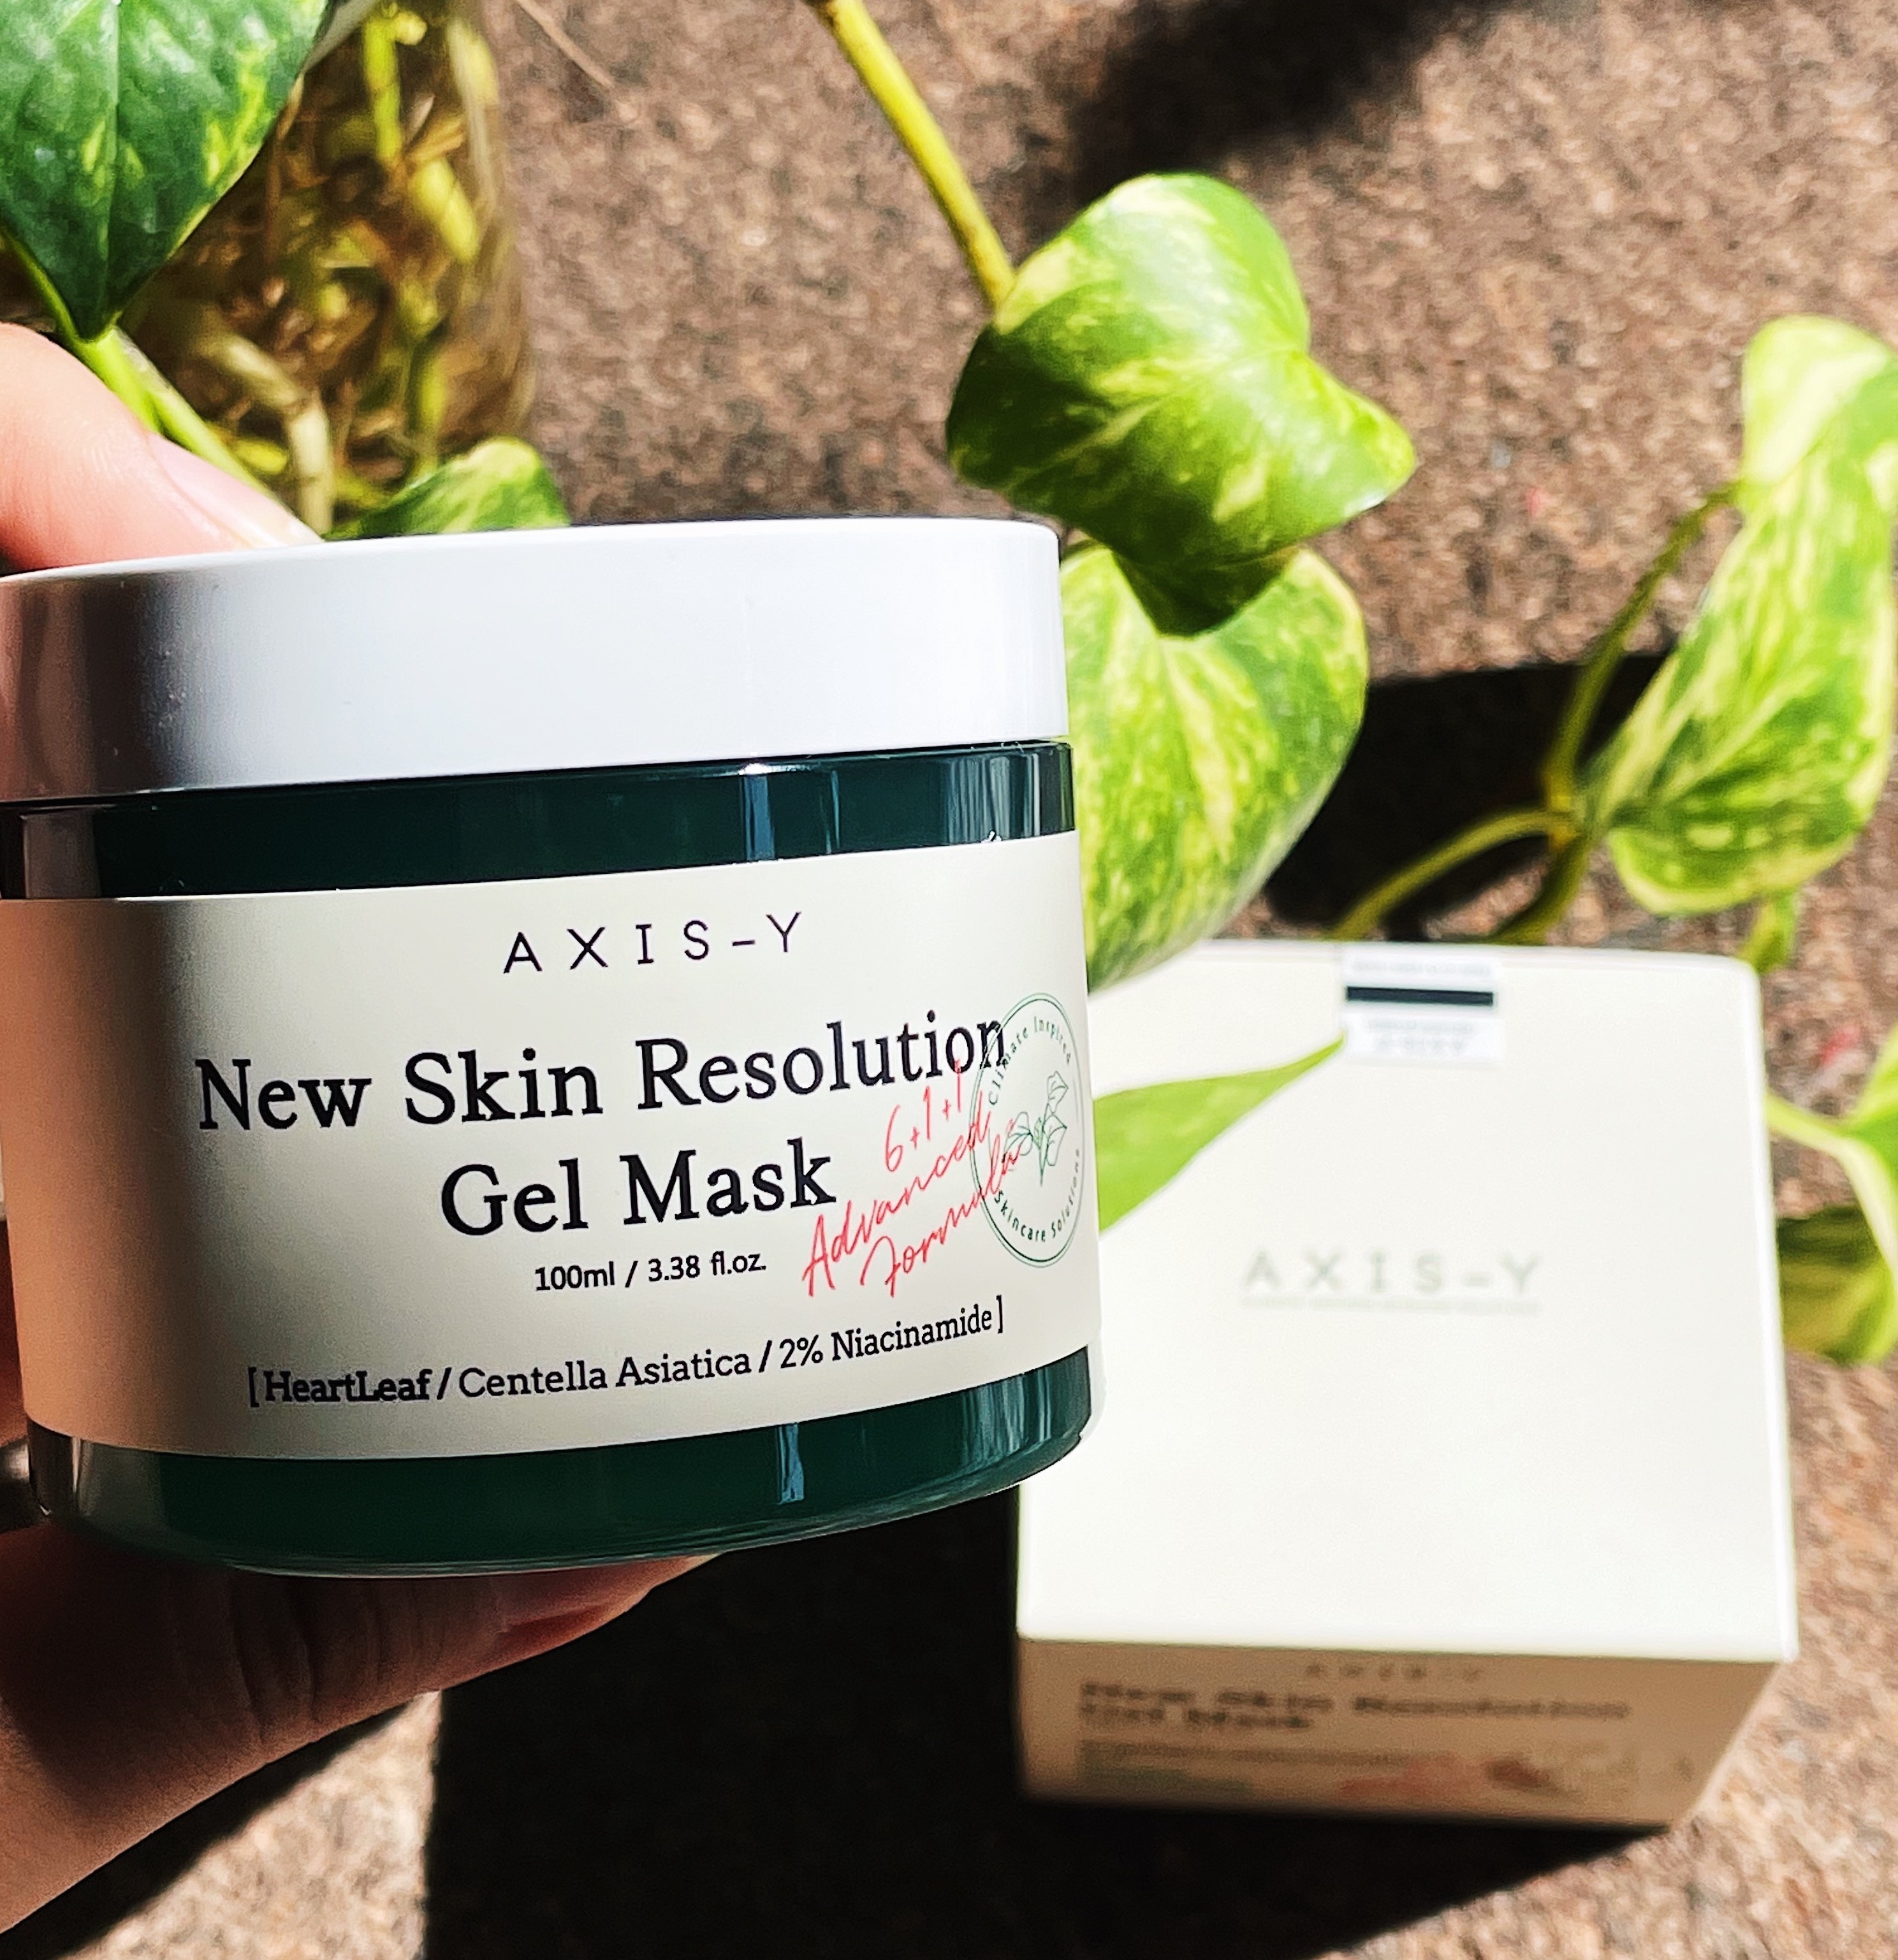 Axis-Y New Skin Resolution Gel Mask - Review Rsjournal